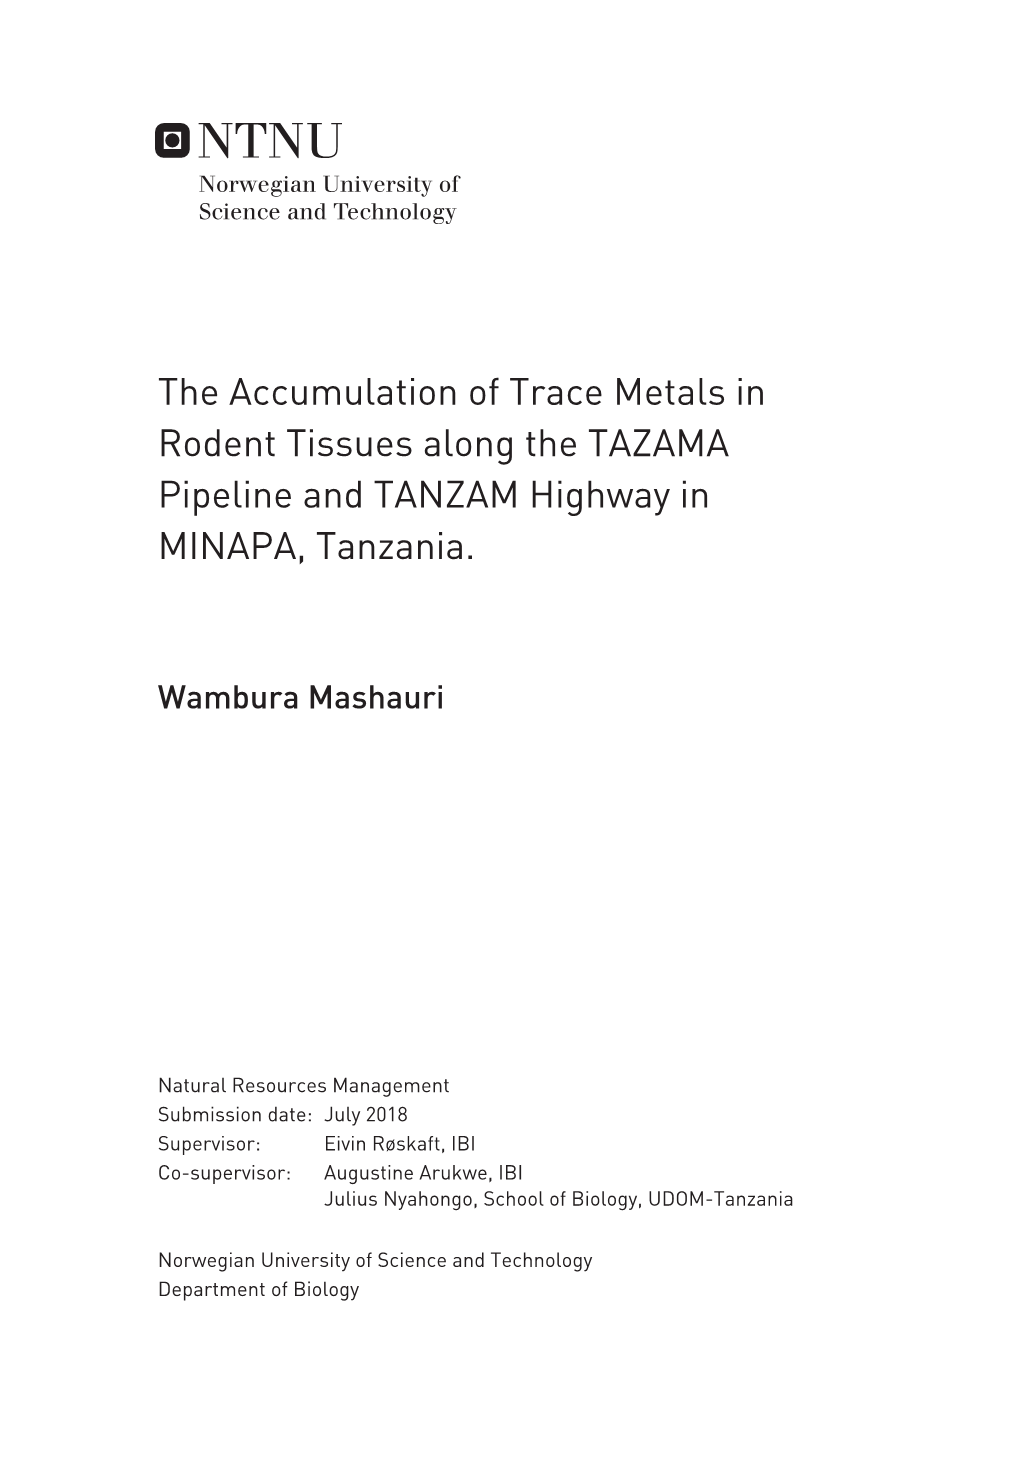 The Accumulation of Trace Metals in Rodent Tissues Along the TAZAMA Pipeline and TANZAM Highway in MINAPA, Tanzania